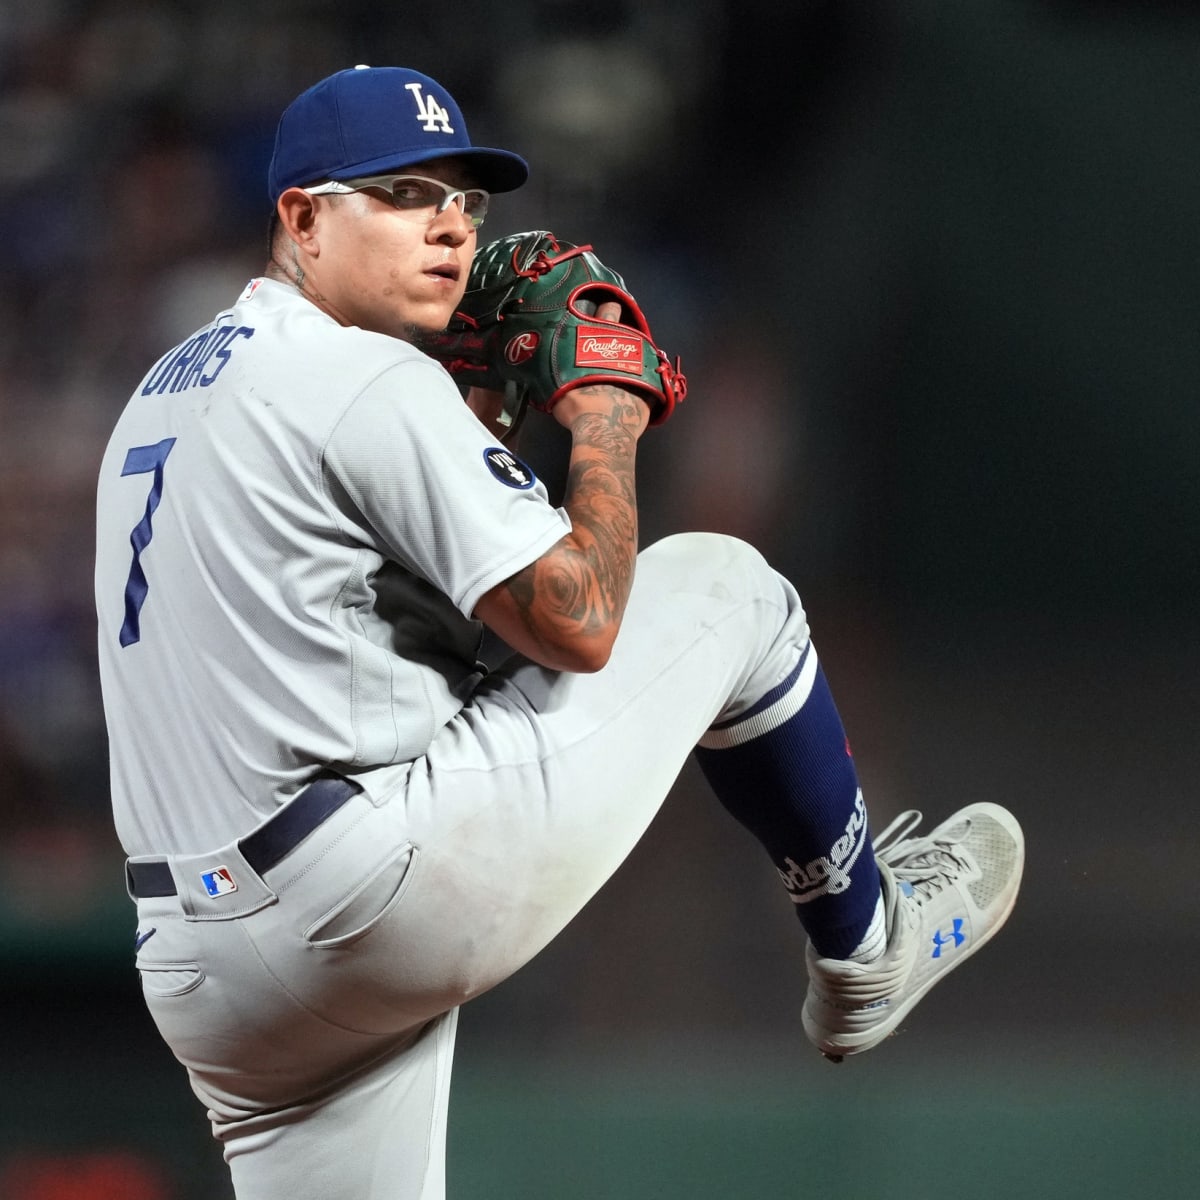 Dodgers' pitchers connected by Mexican heritage